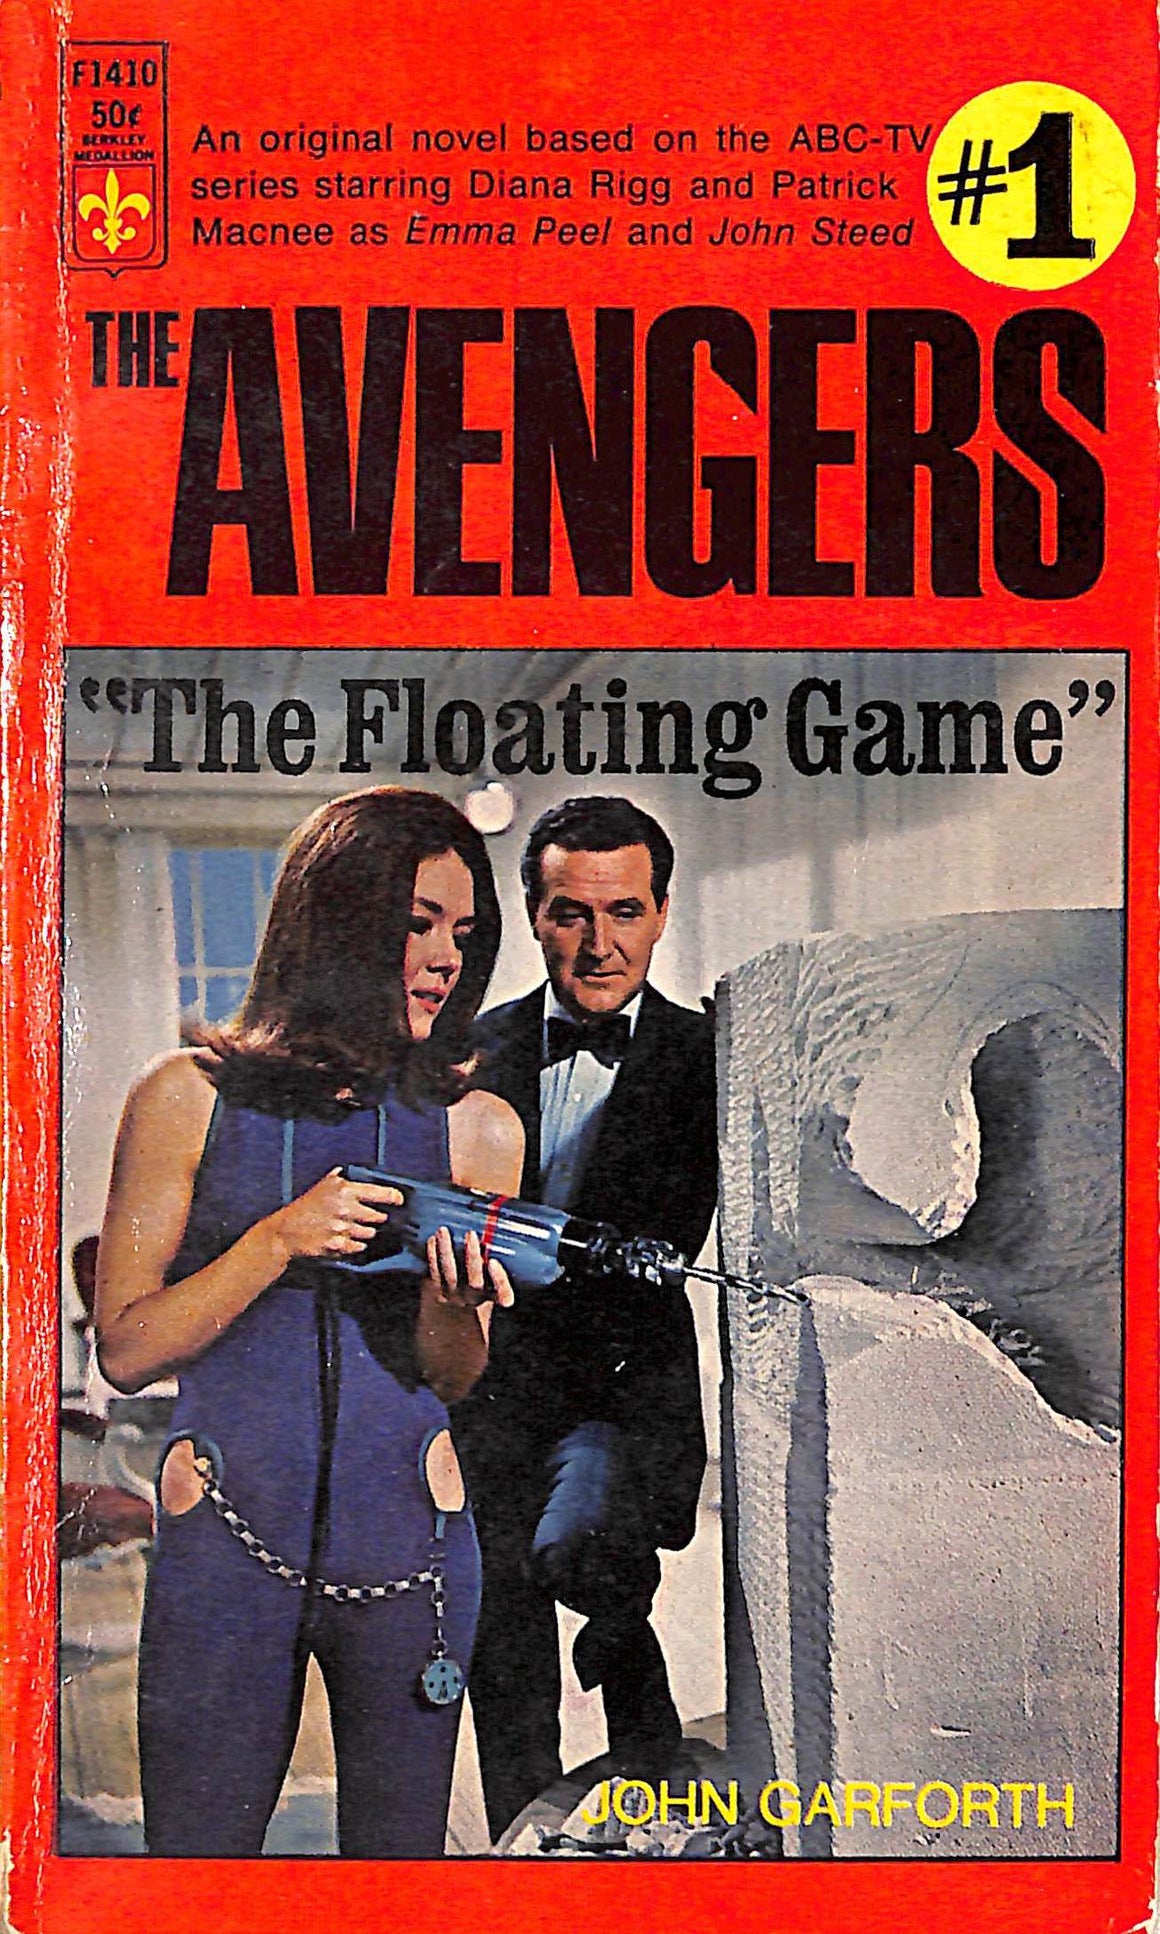 "The Avengers The Floating Game #1 Signed By Patrick Macnee" 1967 GARFORTH, John